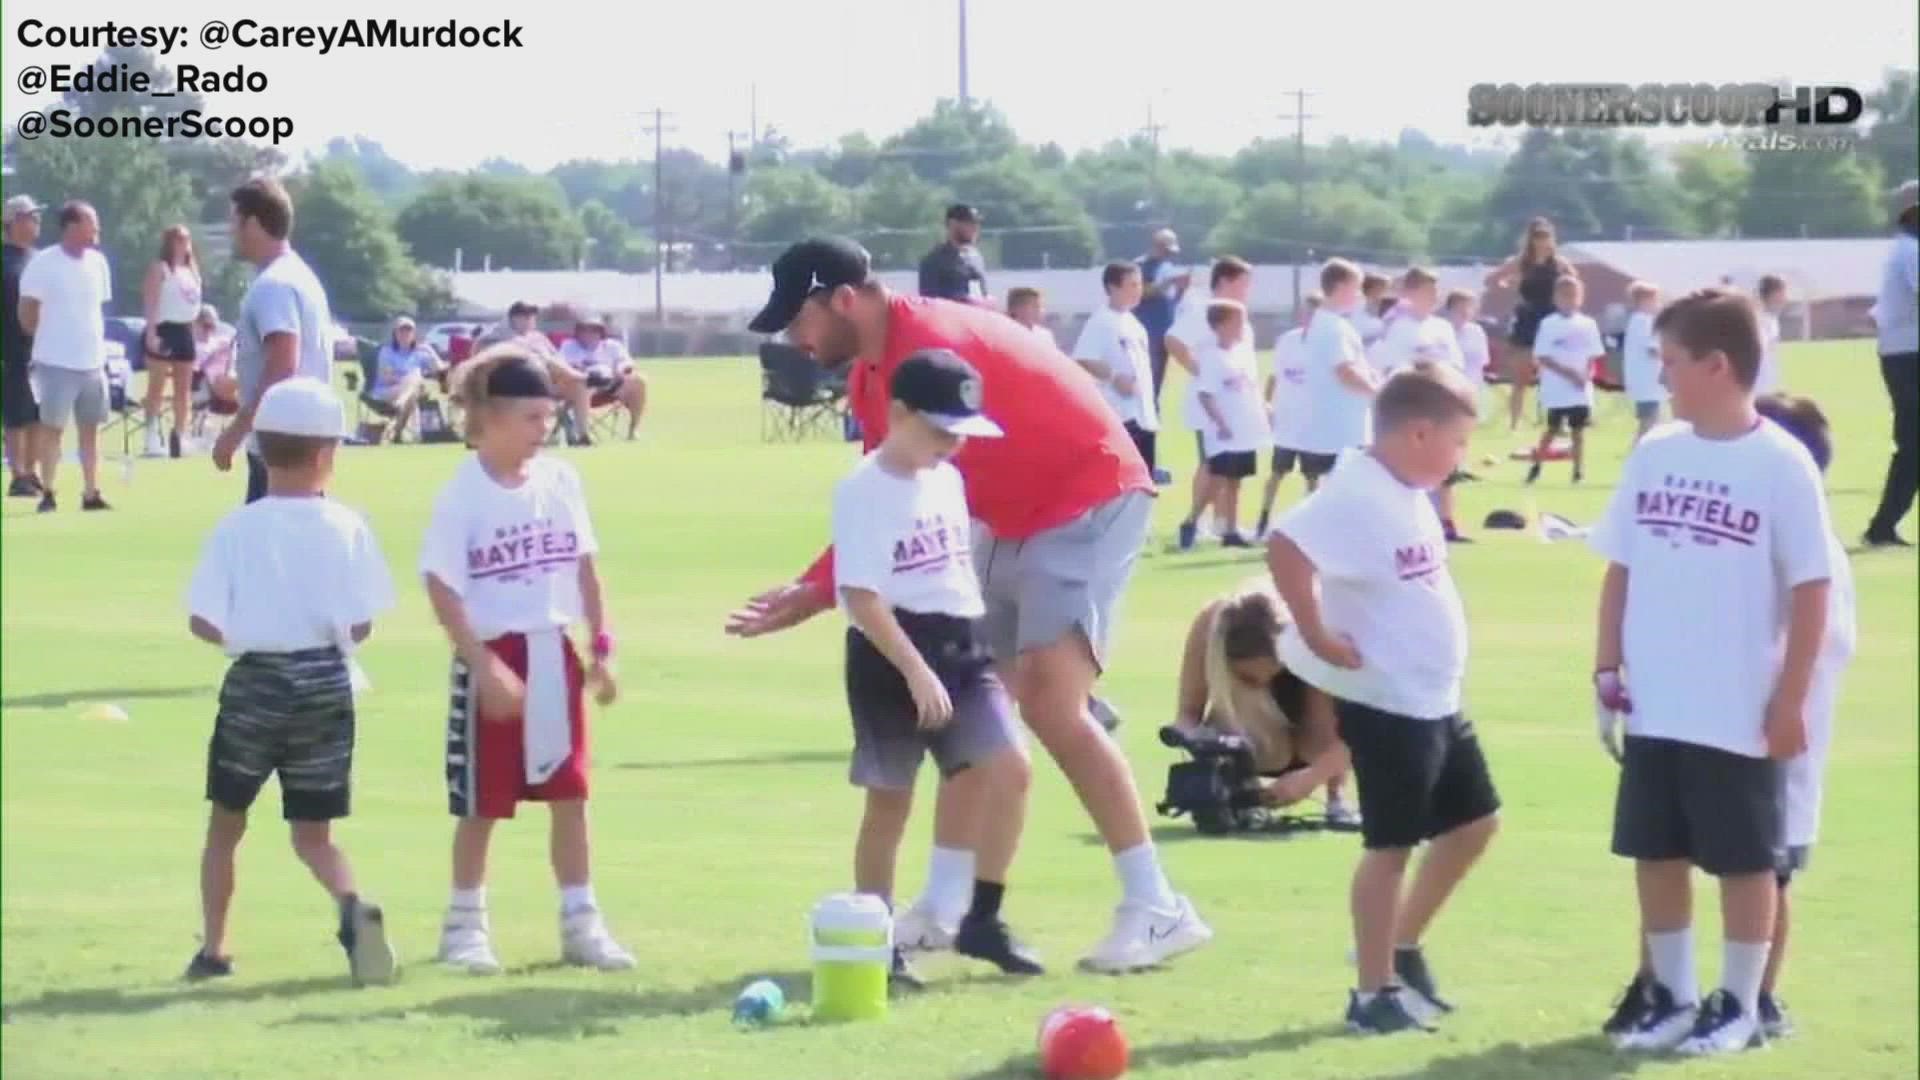 Speaking at his youth football camp in Oklahoma, Baker Mayfield discussed his status with the Cleveland Browns.